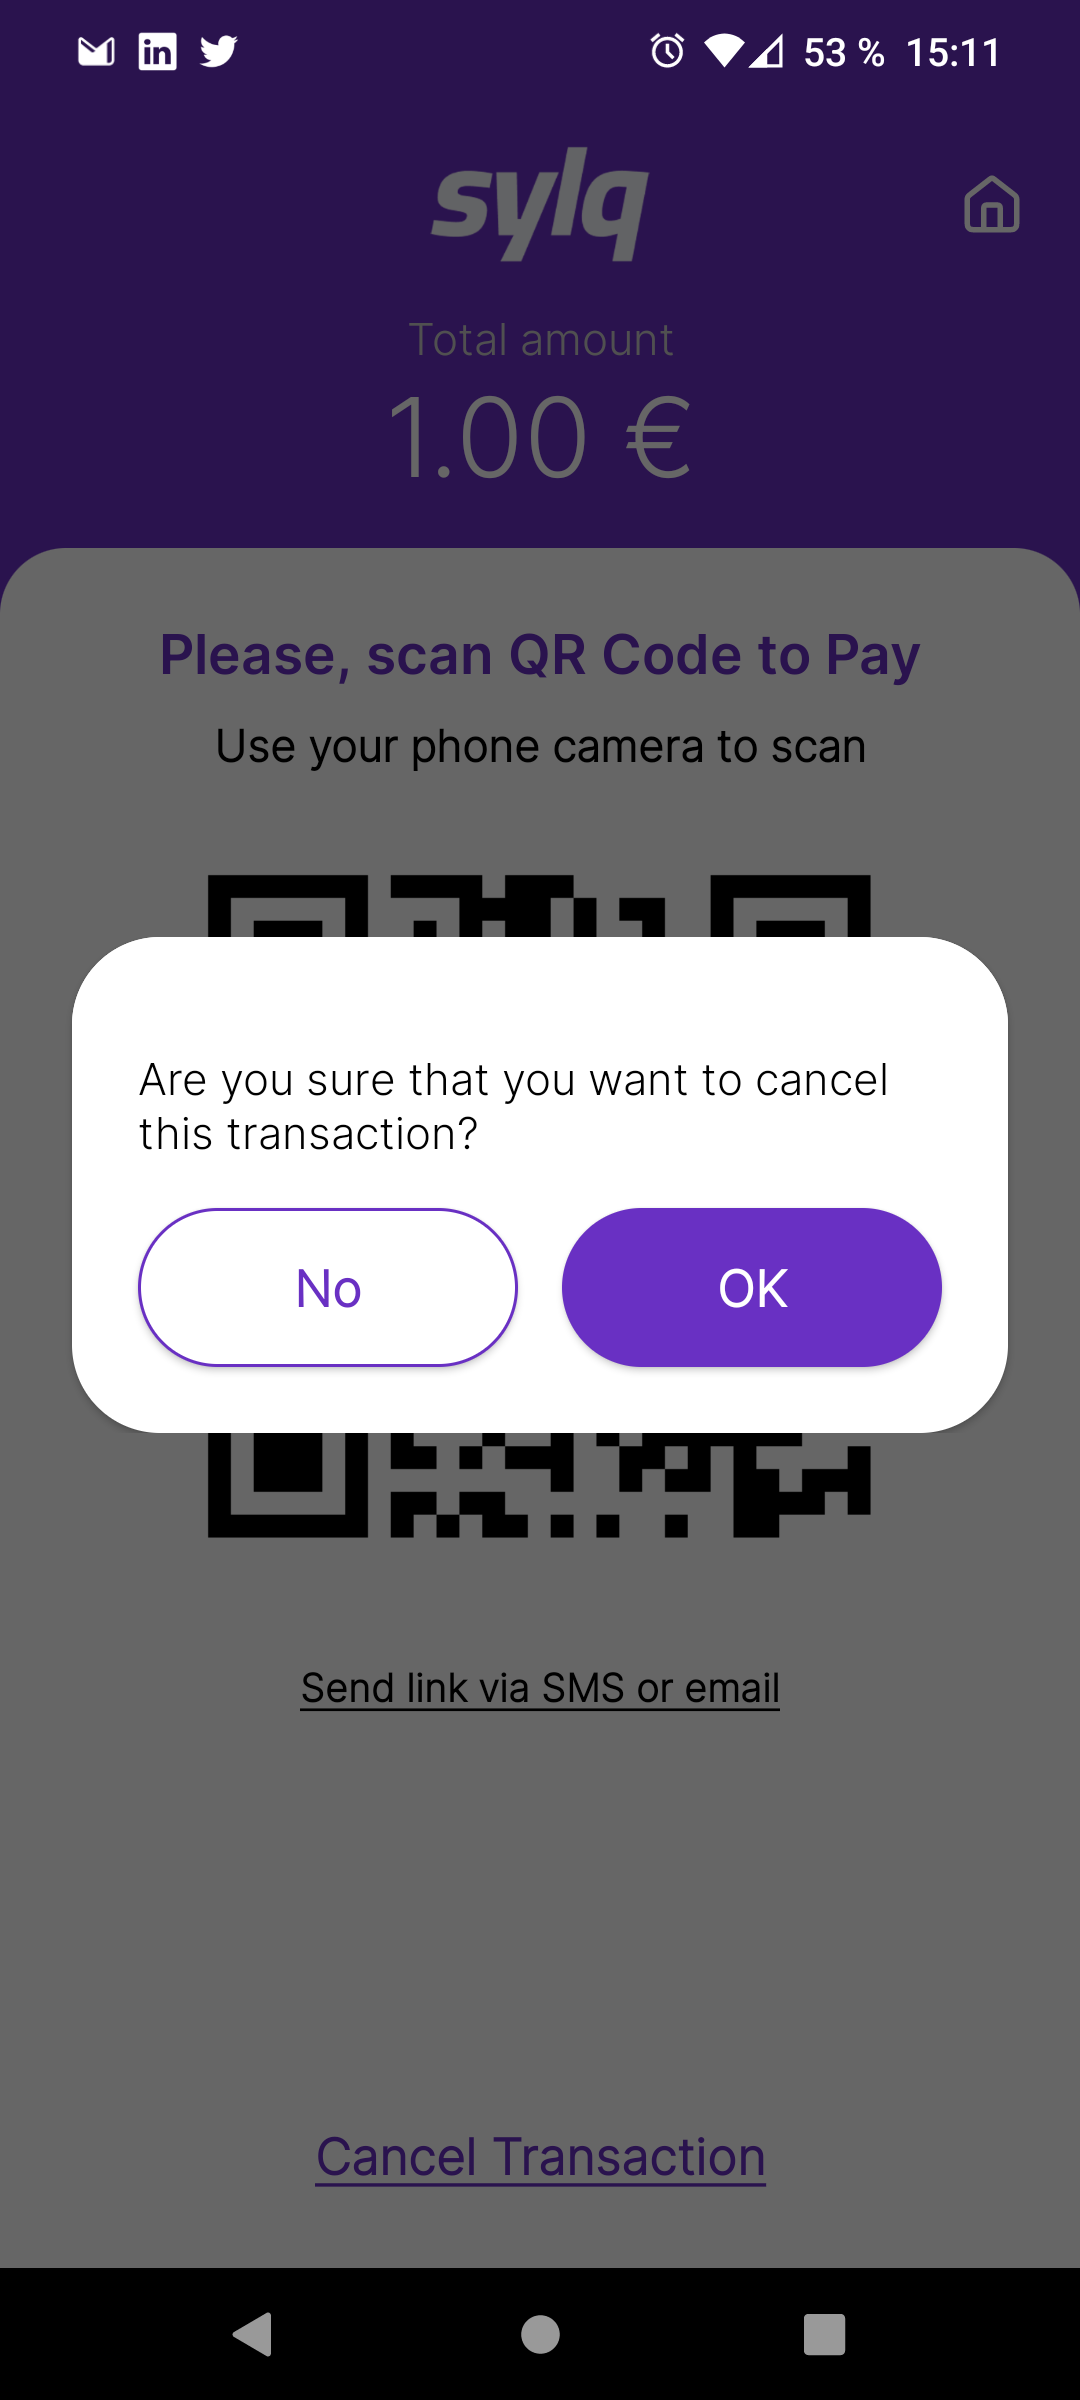 Sylq Scan QR to Pay